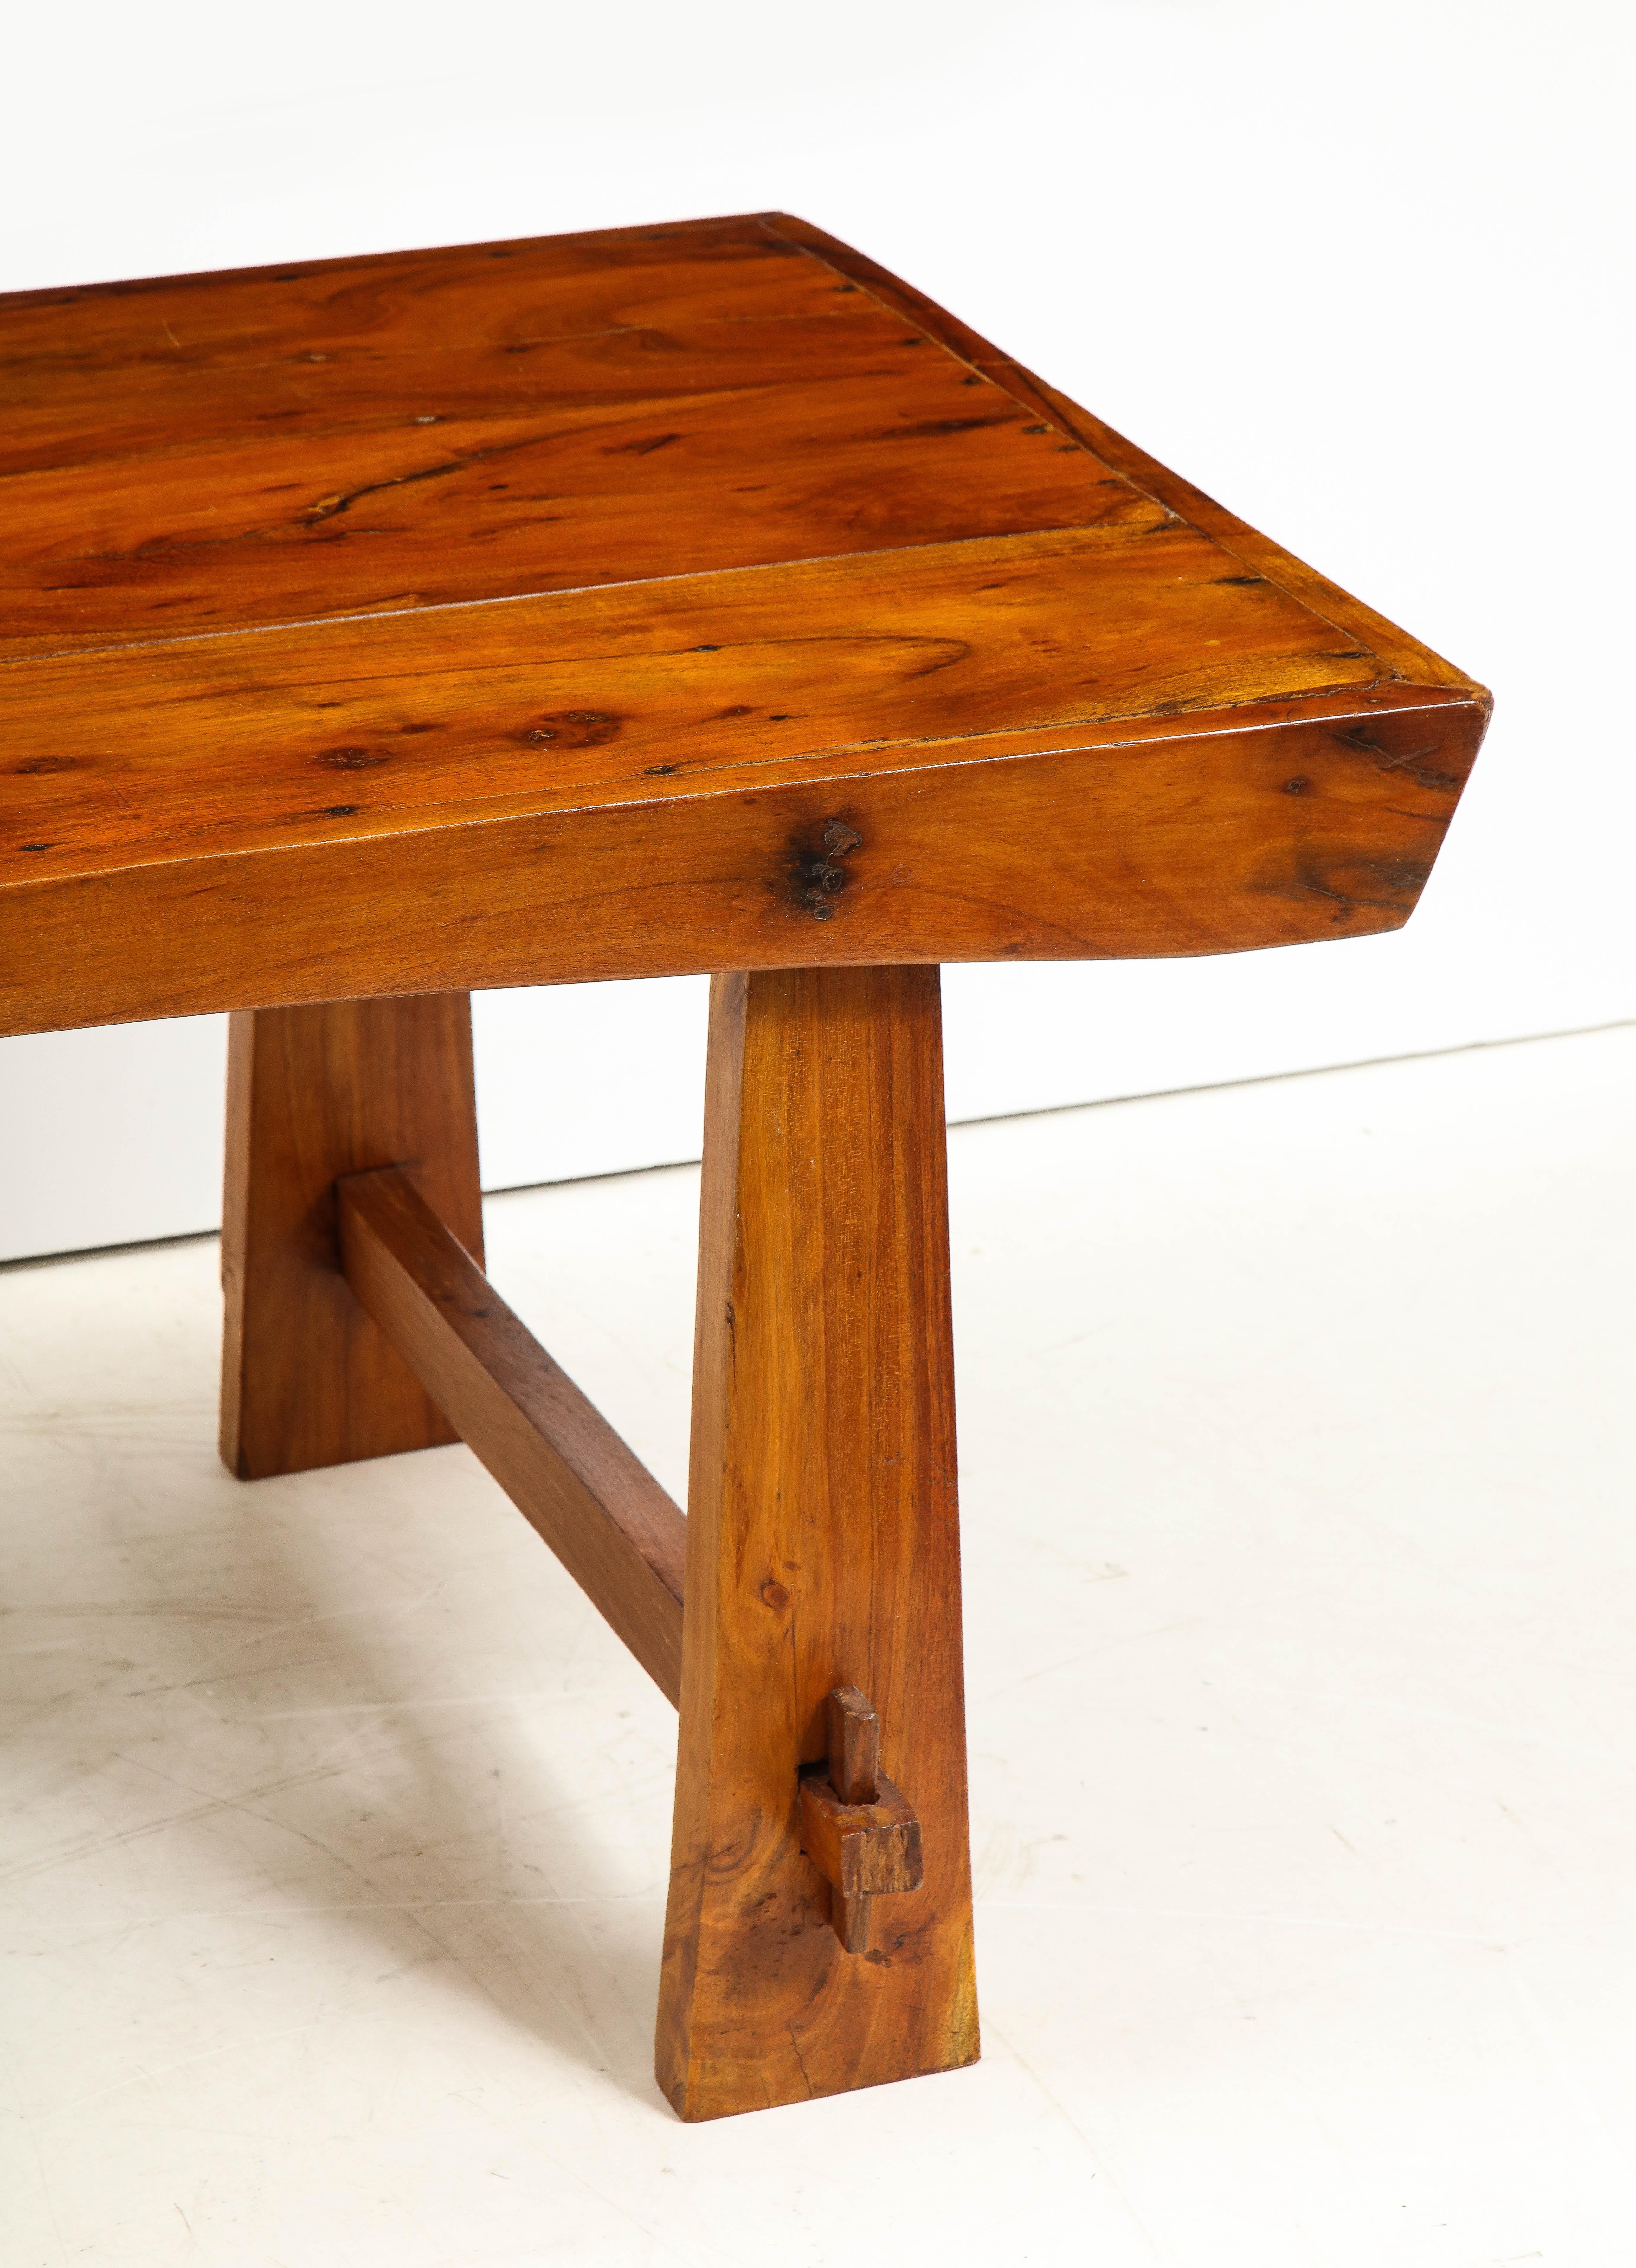 Italian 1950s Folk Art Solid Walnut Coffee Table In Good Condition For Sale In New York, NY